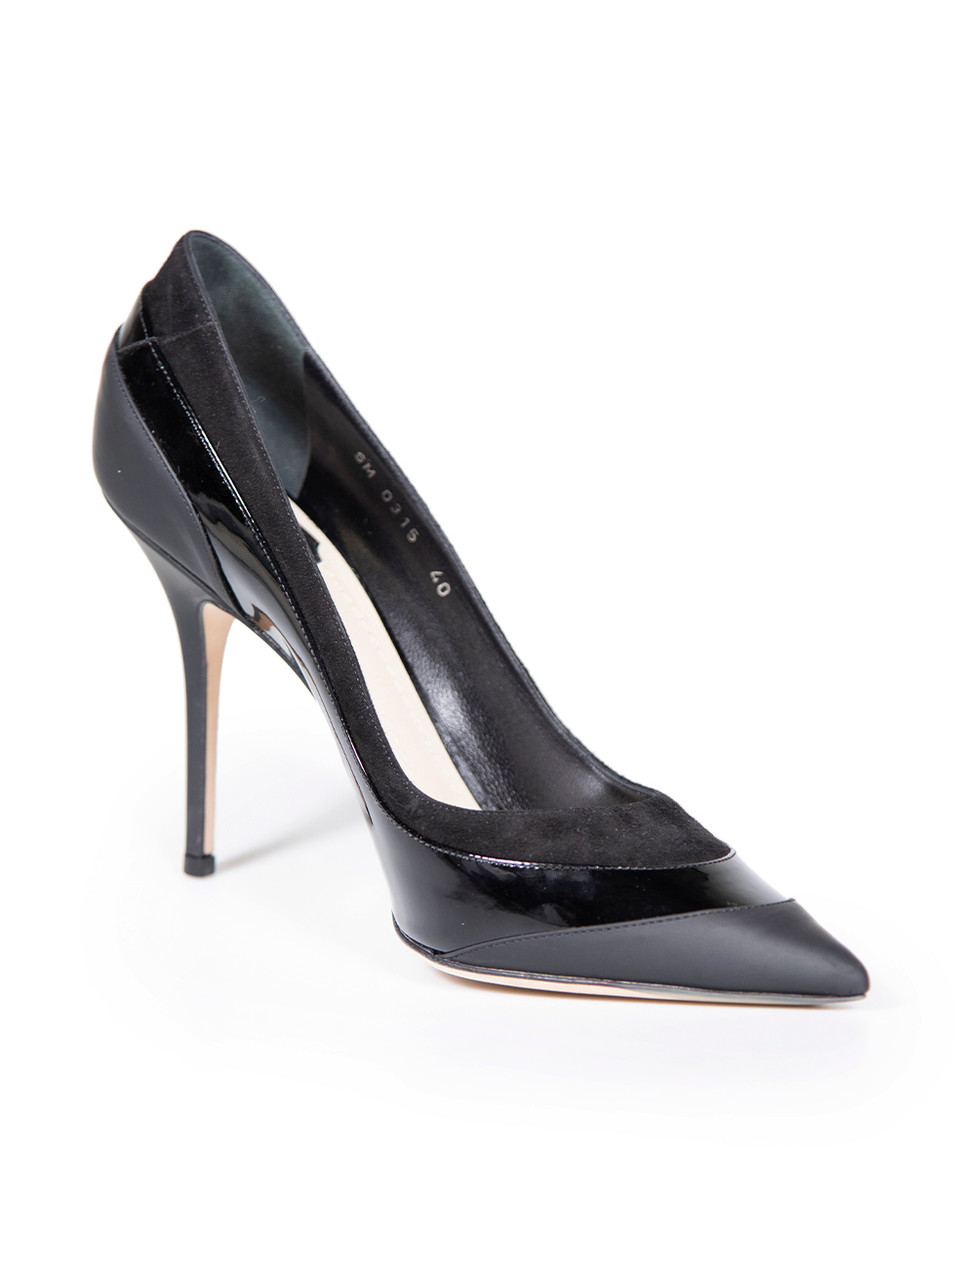 Dior Black Leather Panelled Point Toe Pumps